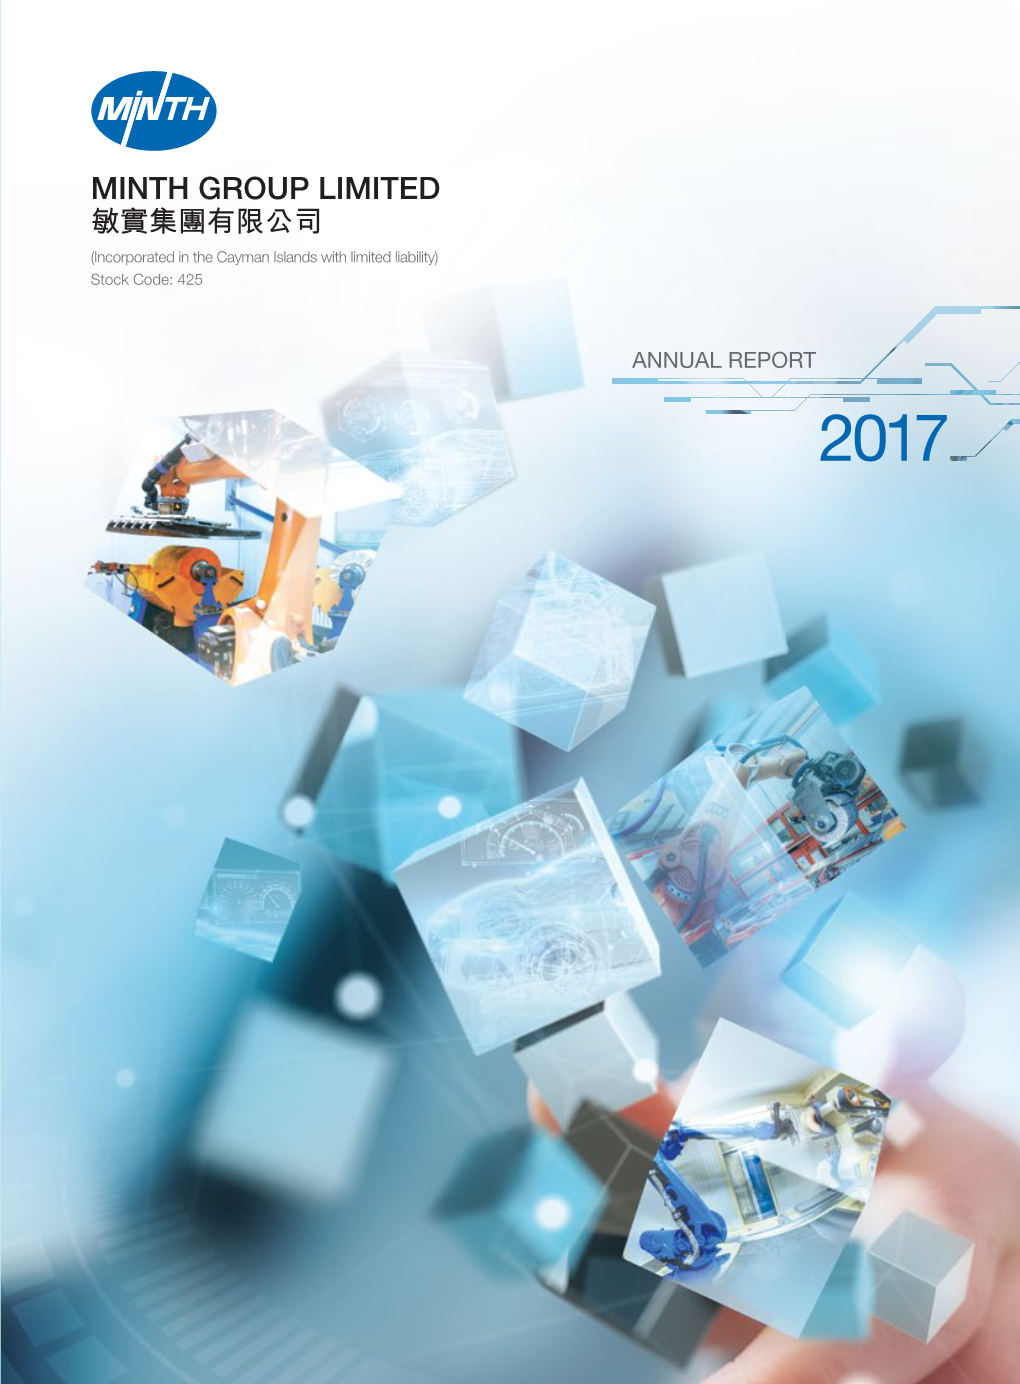 ANNUAL REPORT 2017 2017 ANNUAL REPORT 2 017 年報 CORE VALUES • Integrity • Teamwork • Trust • Embrace Change VISION We Create Beauty in Motion with Intelligence